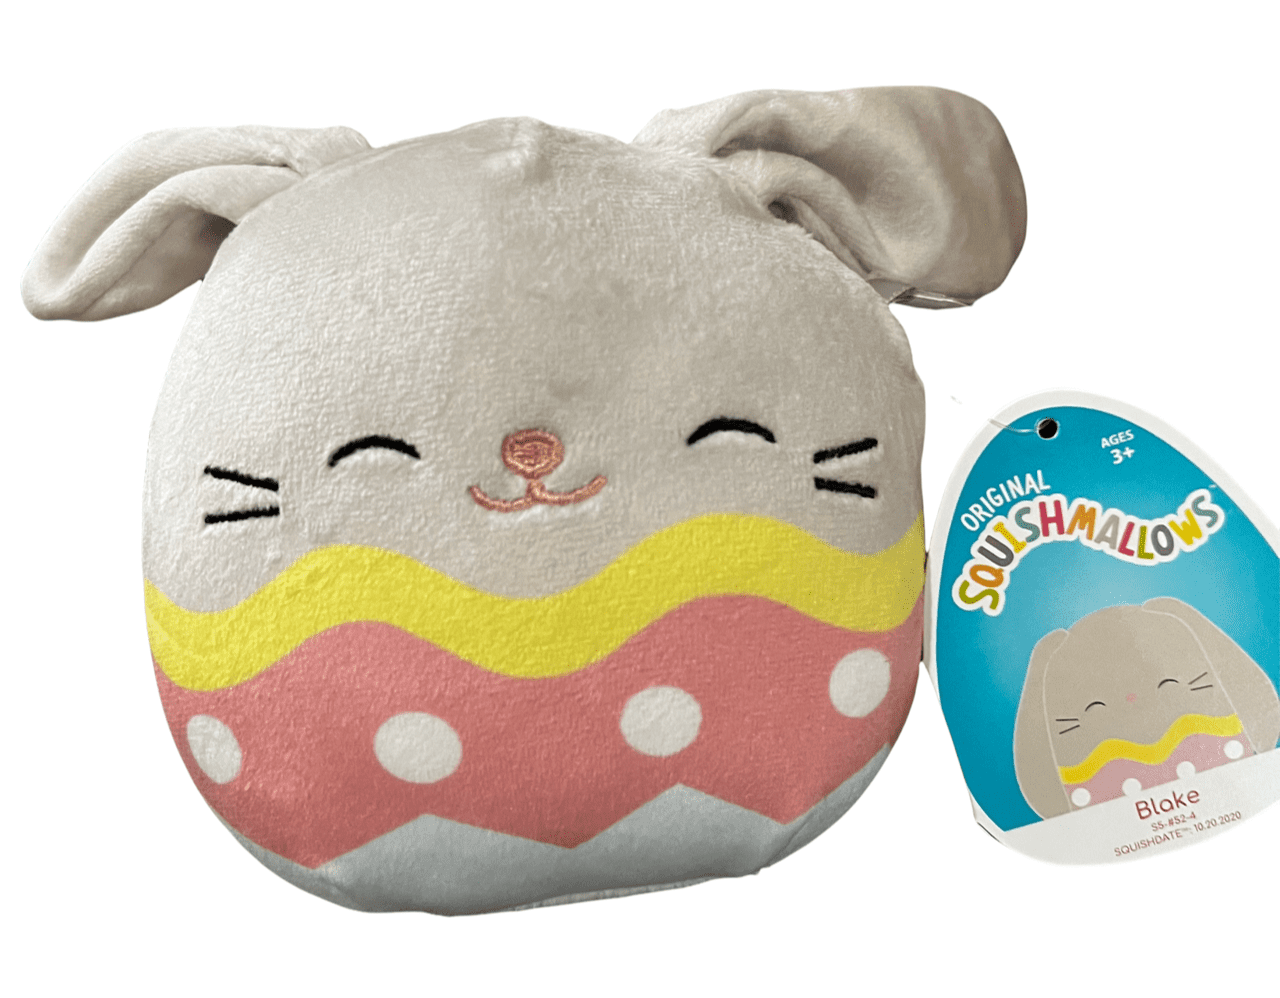 2022 Limited Edition 5 inch Squishmallows Blake The Easter Egg Bunny ...